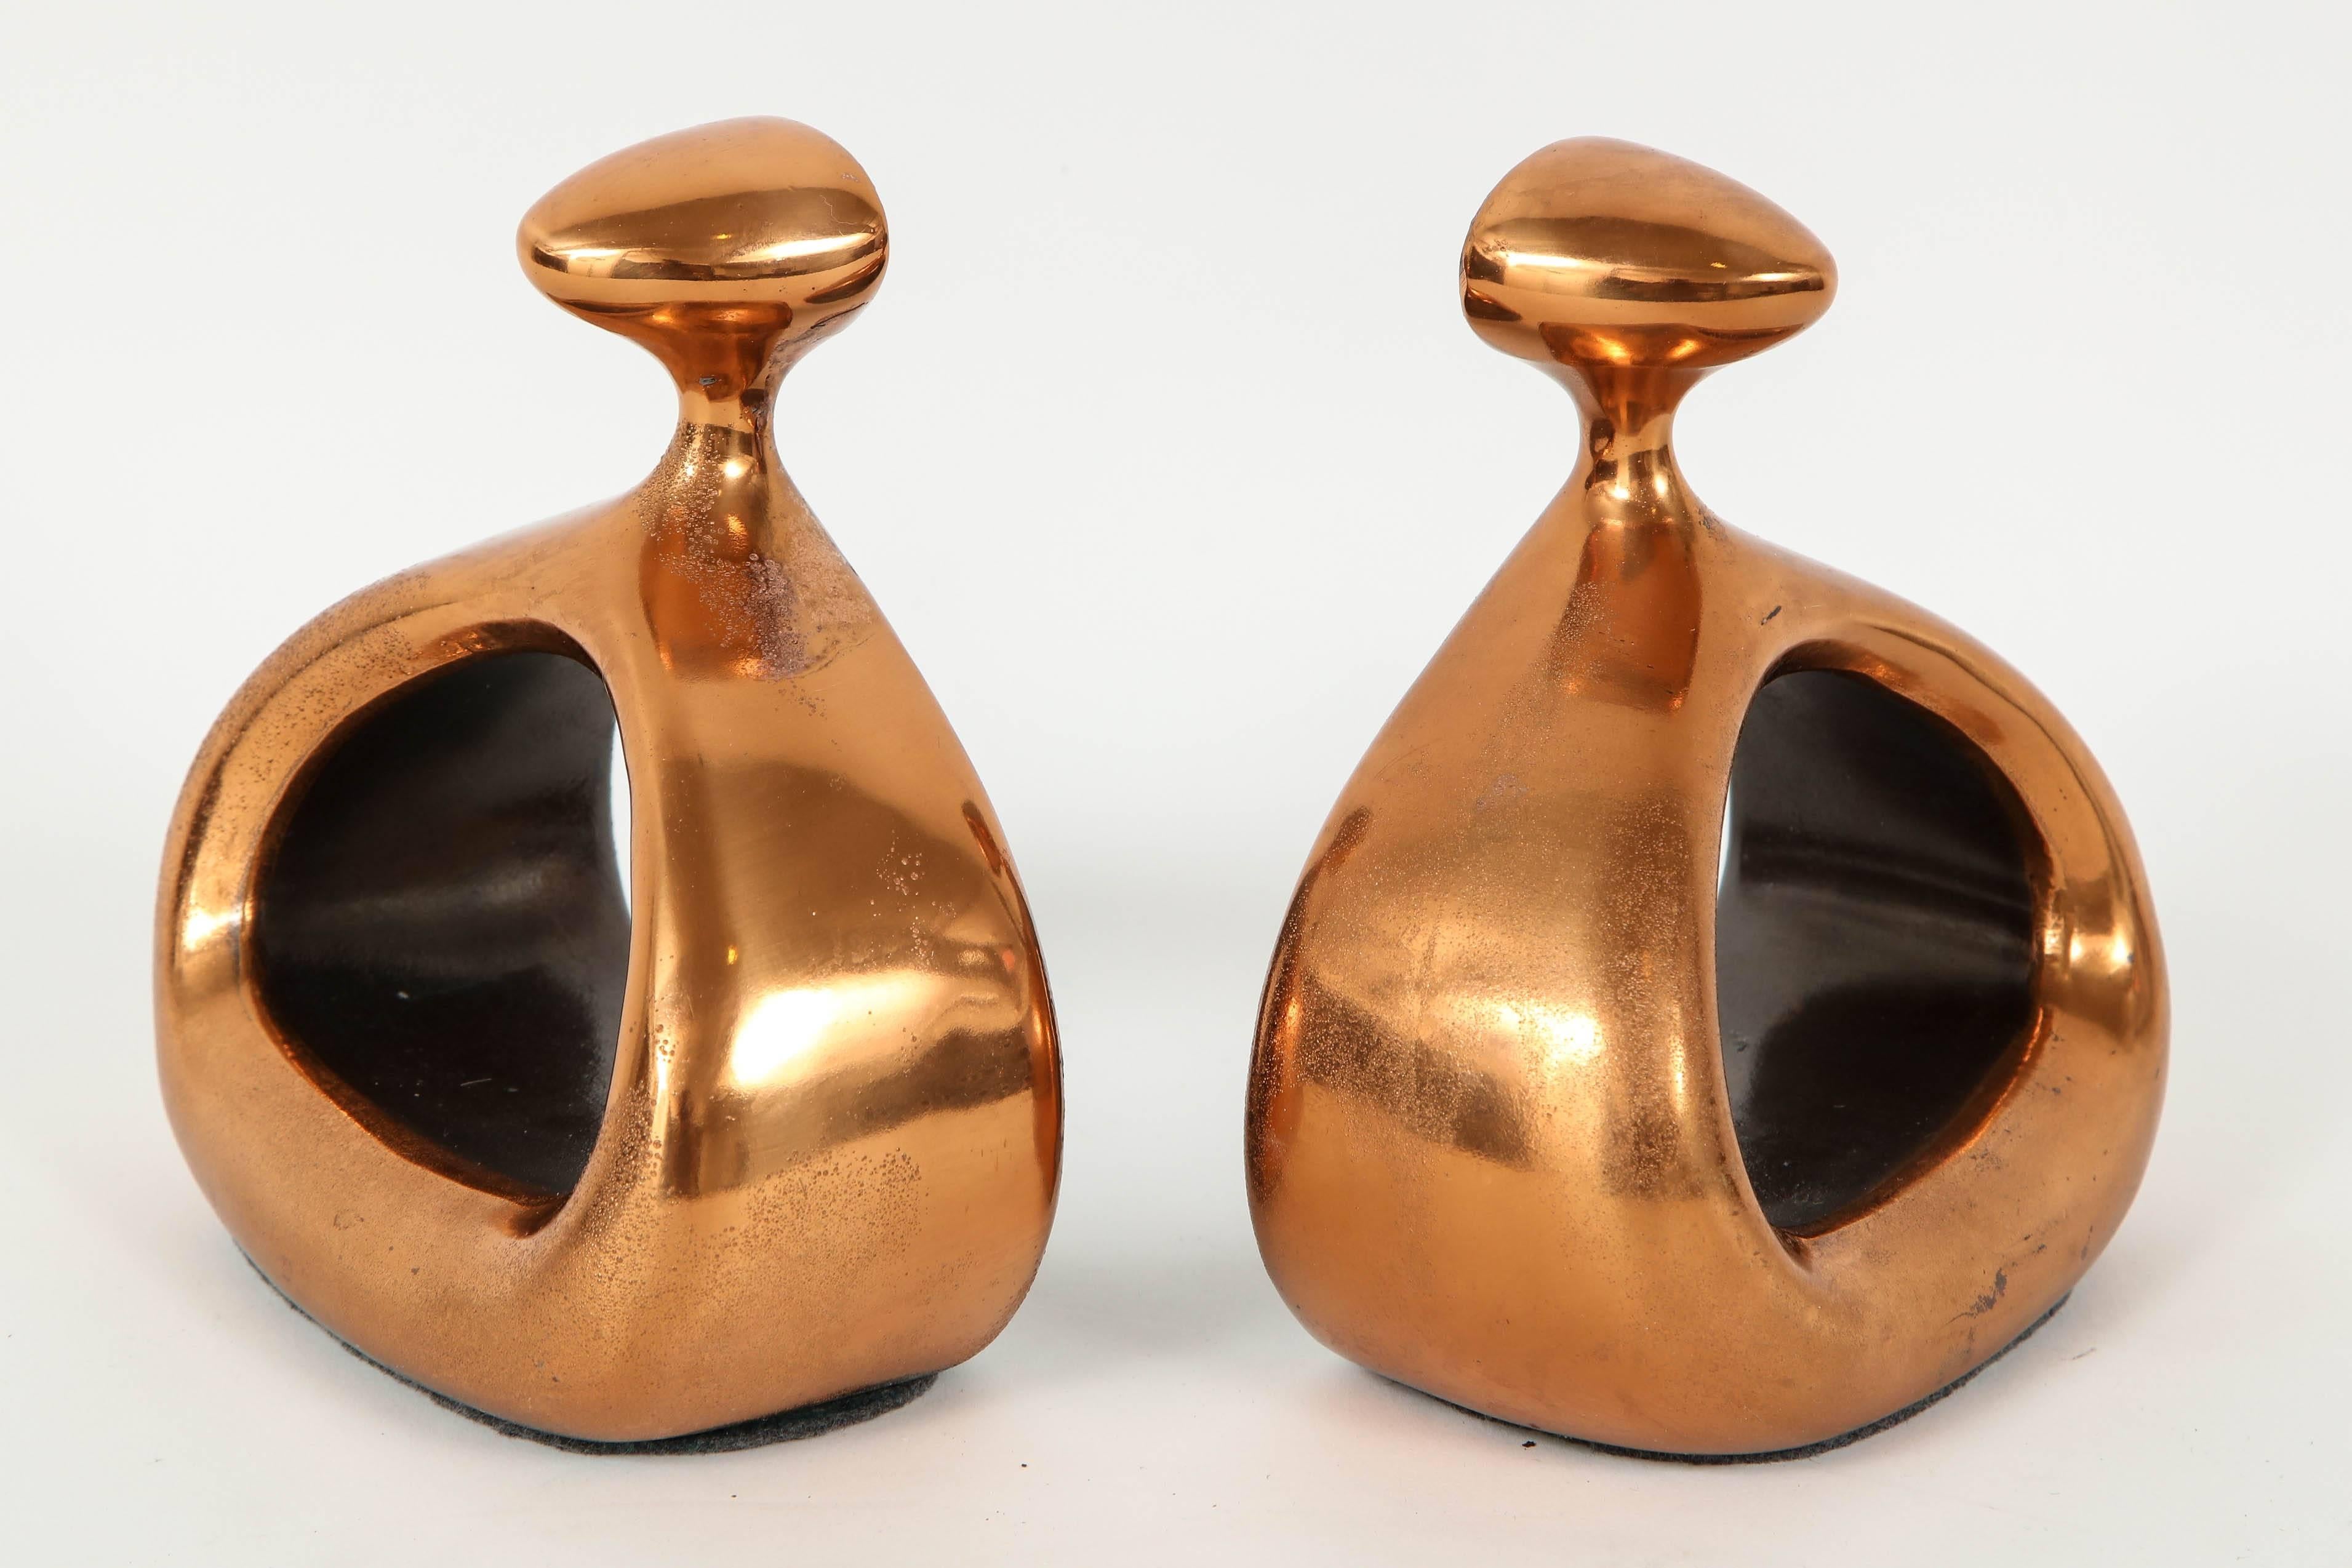 Pair of midcentury classic stirrup bookends in a copper finish. Grey felt bottoms. Labeled, Ben Seibel/Jenfredware.